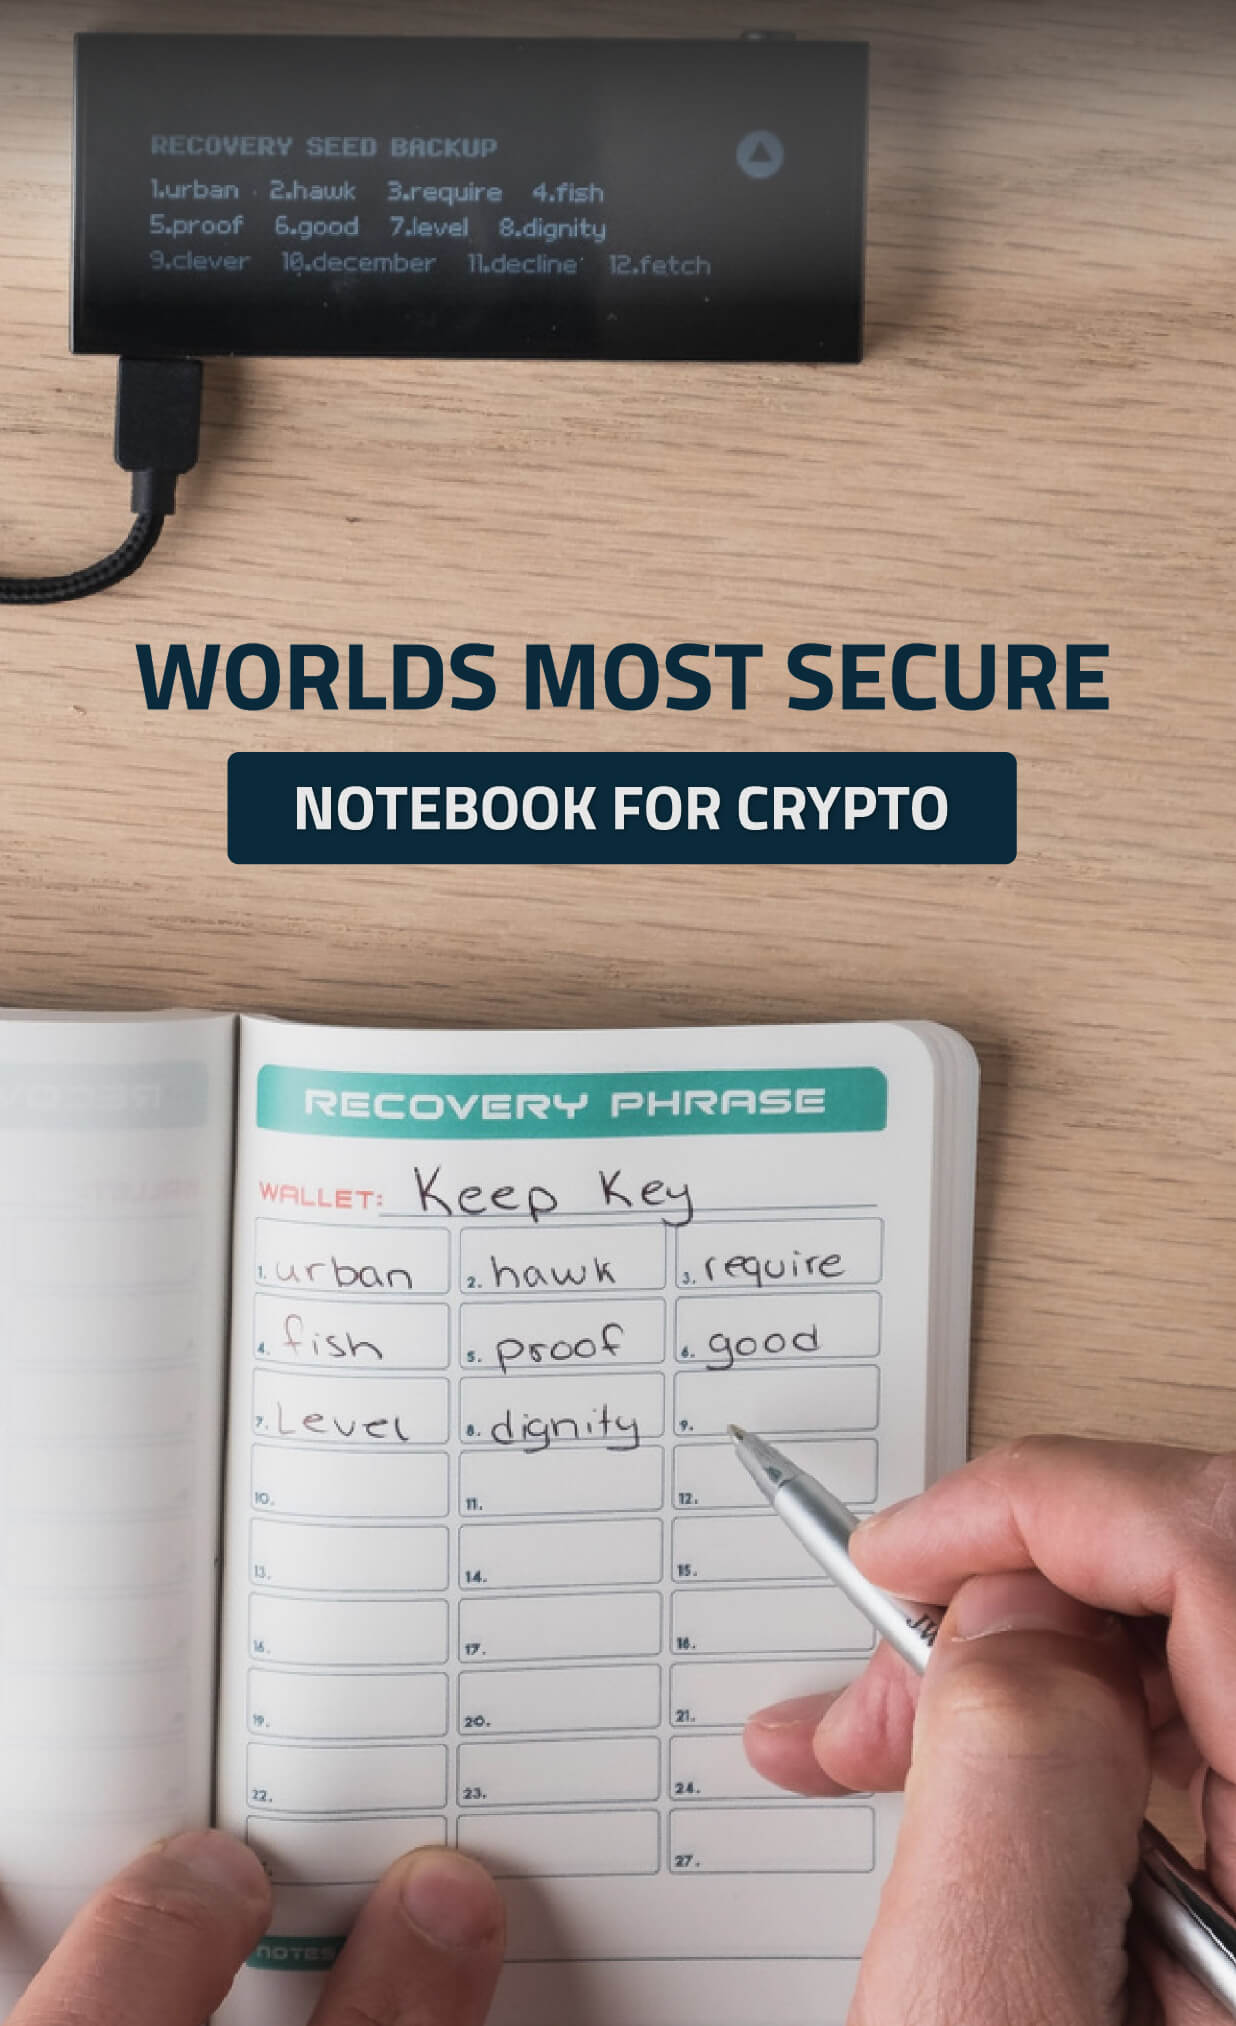 Cryo Crypto Seed Phrase Storage Notebook - Waterproof Stone Paper Book - Cryptocurrency Recovery Phrase Password Keeper - Cold Storage Wallet Backup